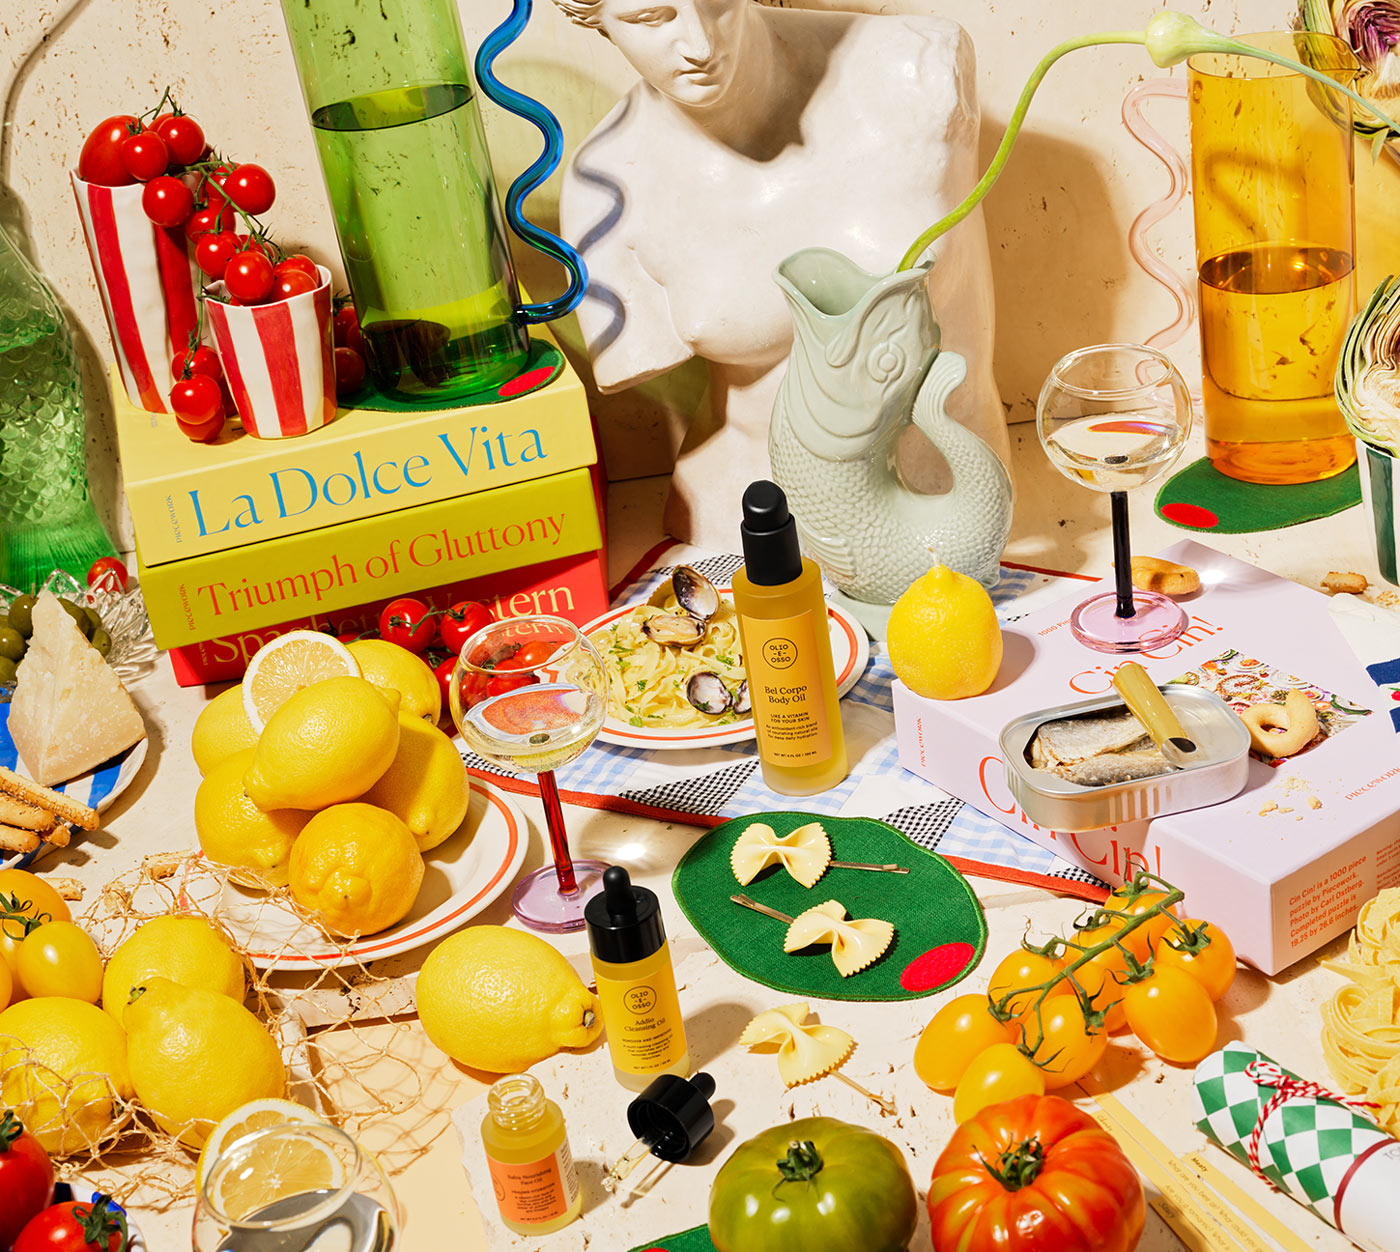 An Italy-themed scene filled with puzzles and other gifts and goods, e.g. the La Dolce Vita puzzle, wine glasses, olive cocktail napkins, and farfalle barrettes